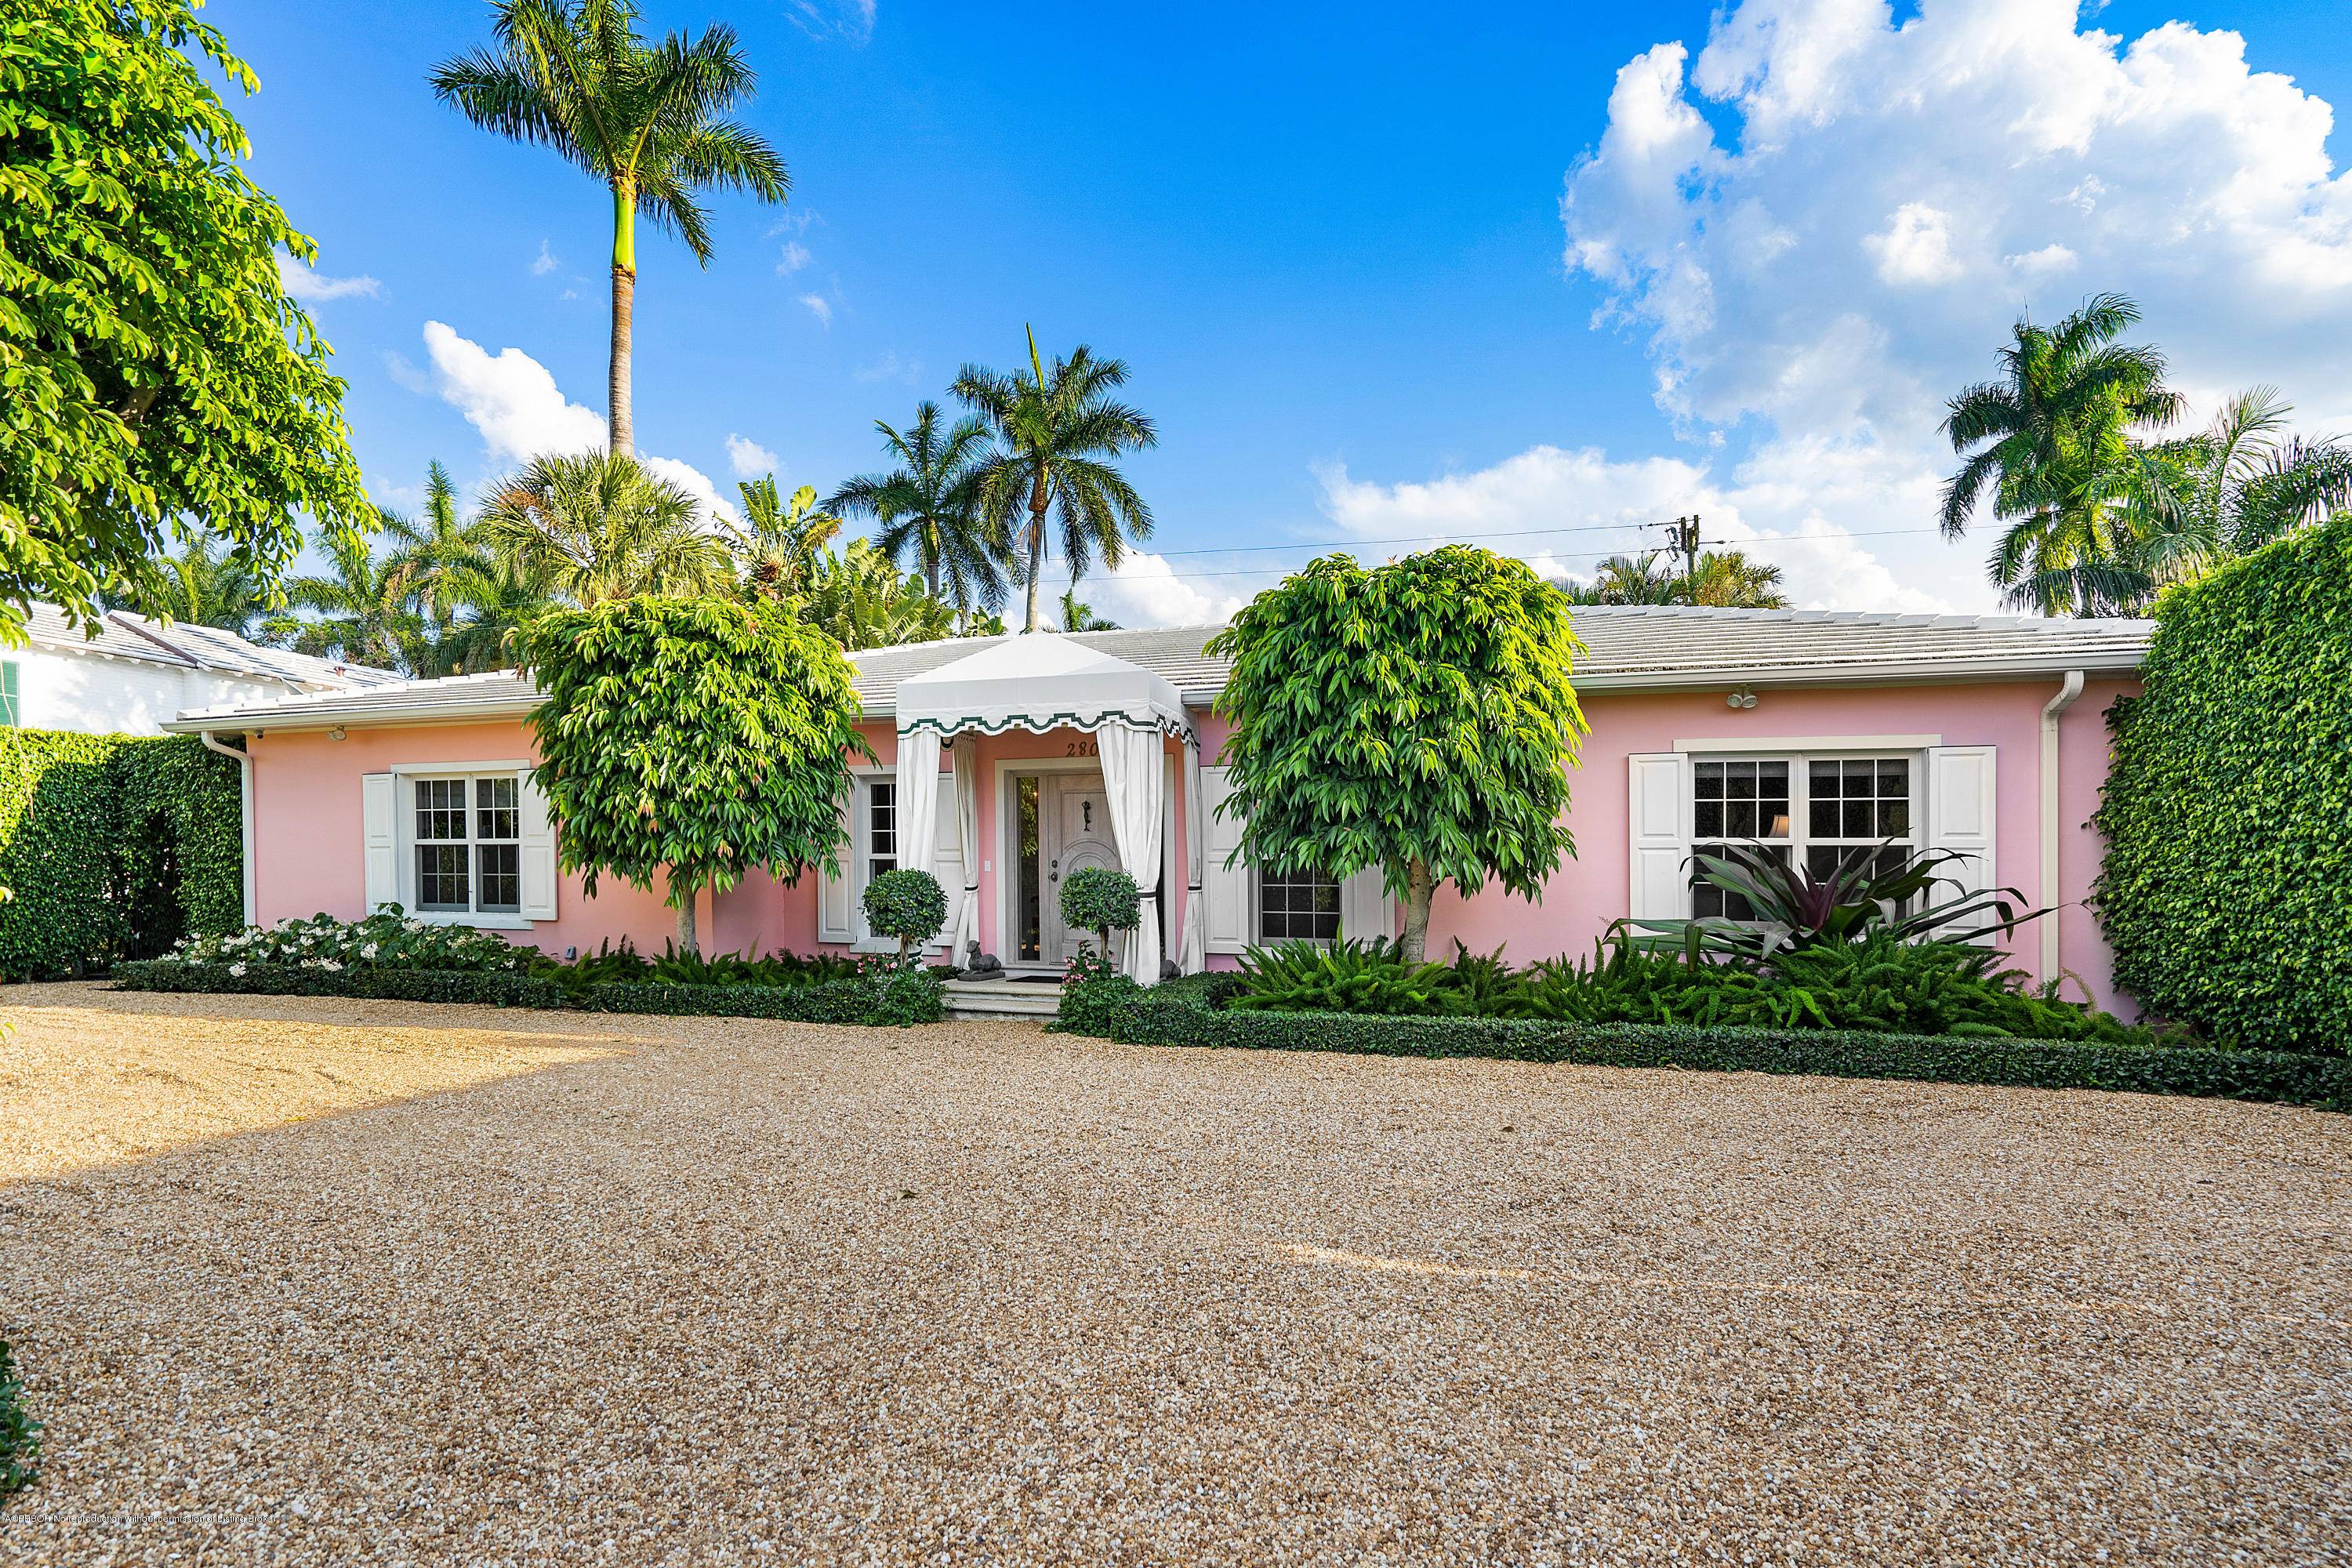 Classic Palm Beach style, 4 BD 4 BA, Bermuda home close to town on desirable street.